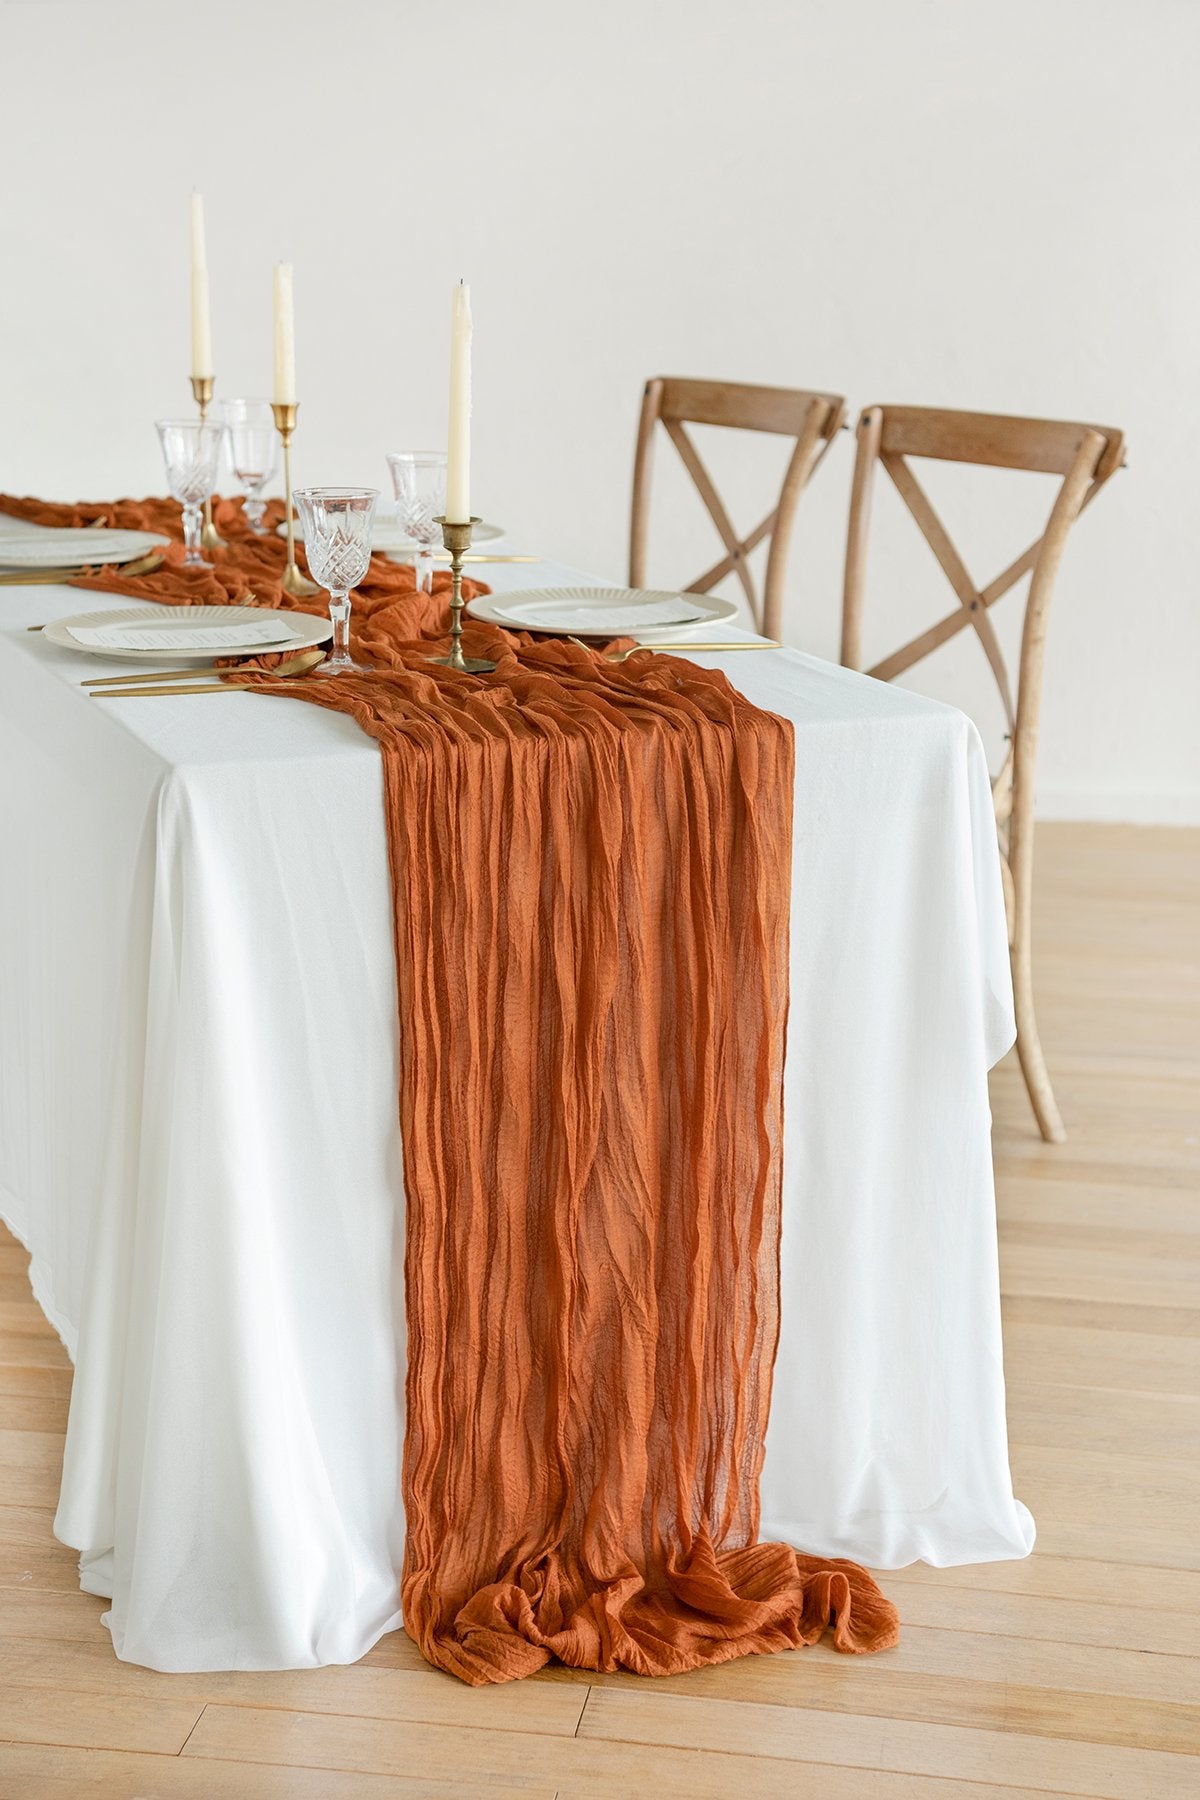 Rustic Gauze Cheesecloth Table Runner 30"w x 10FT - 7 colors - lingsDev